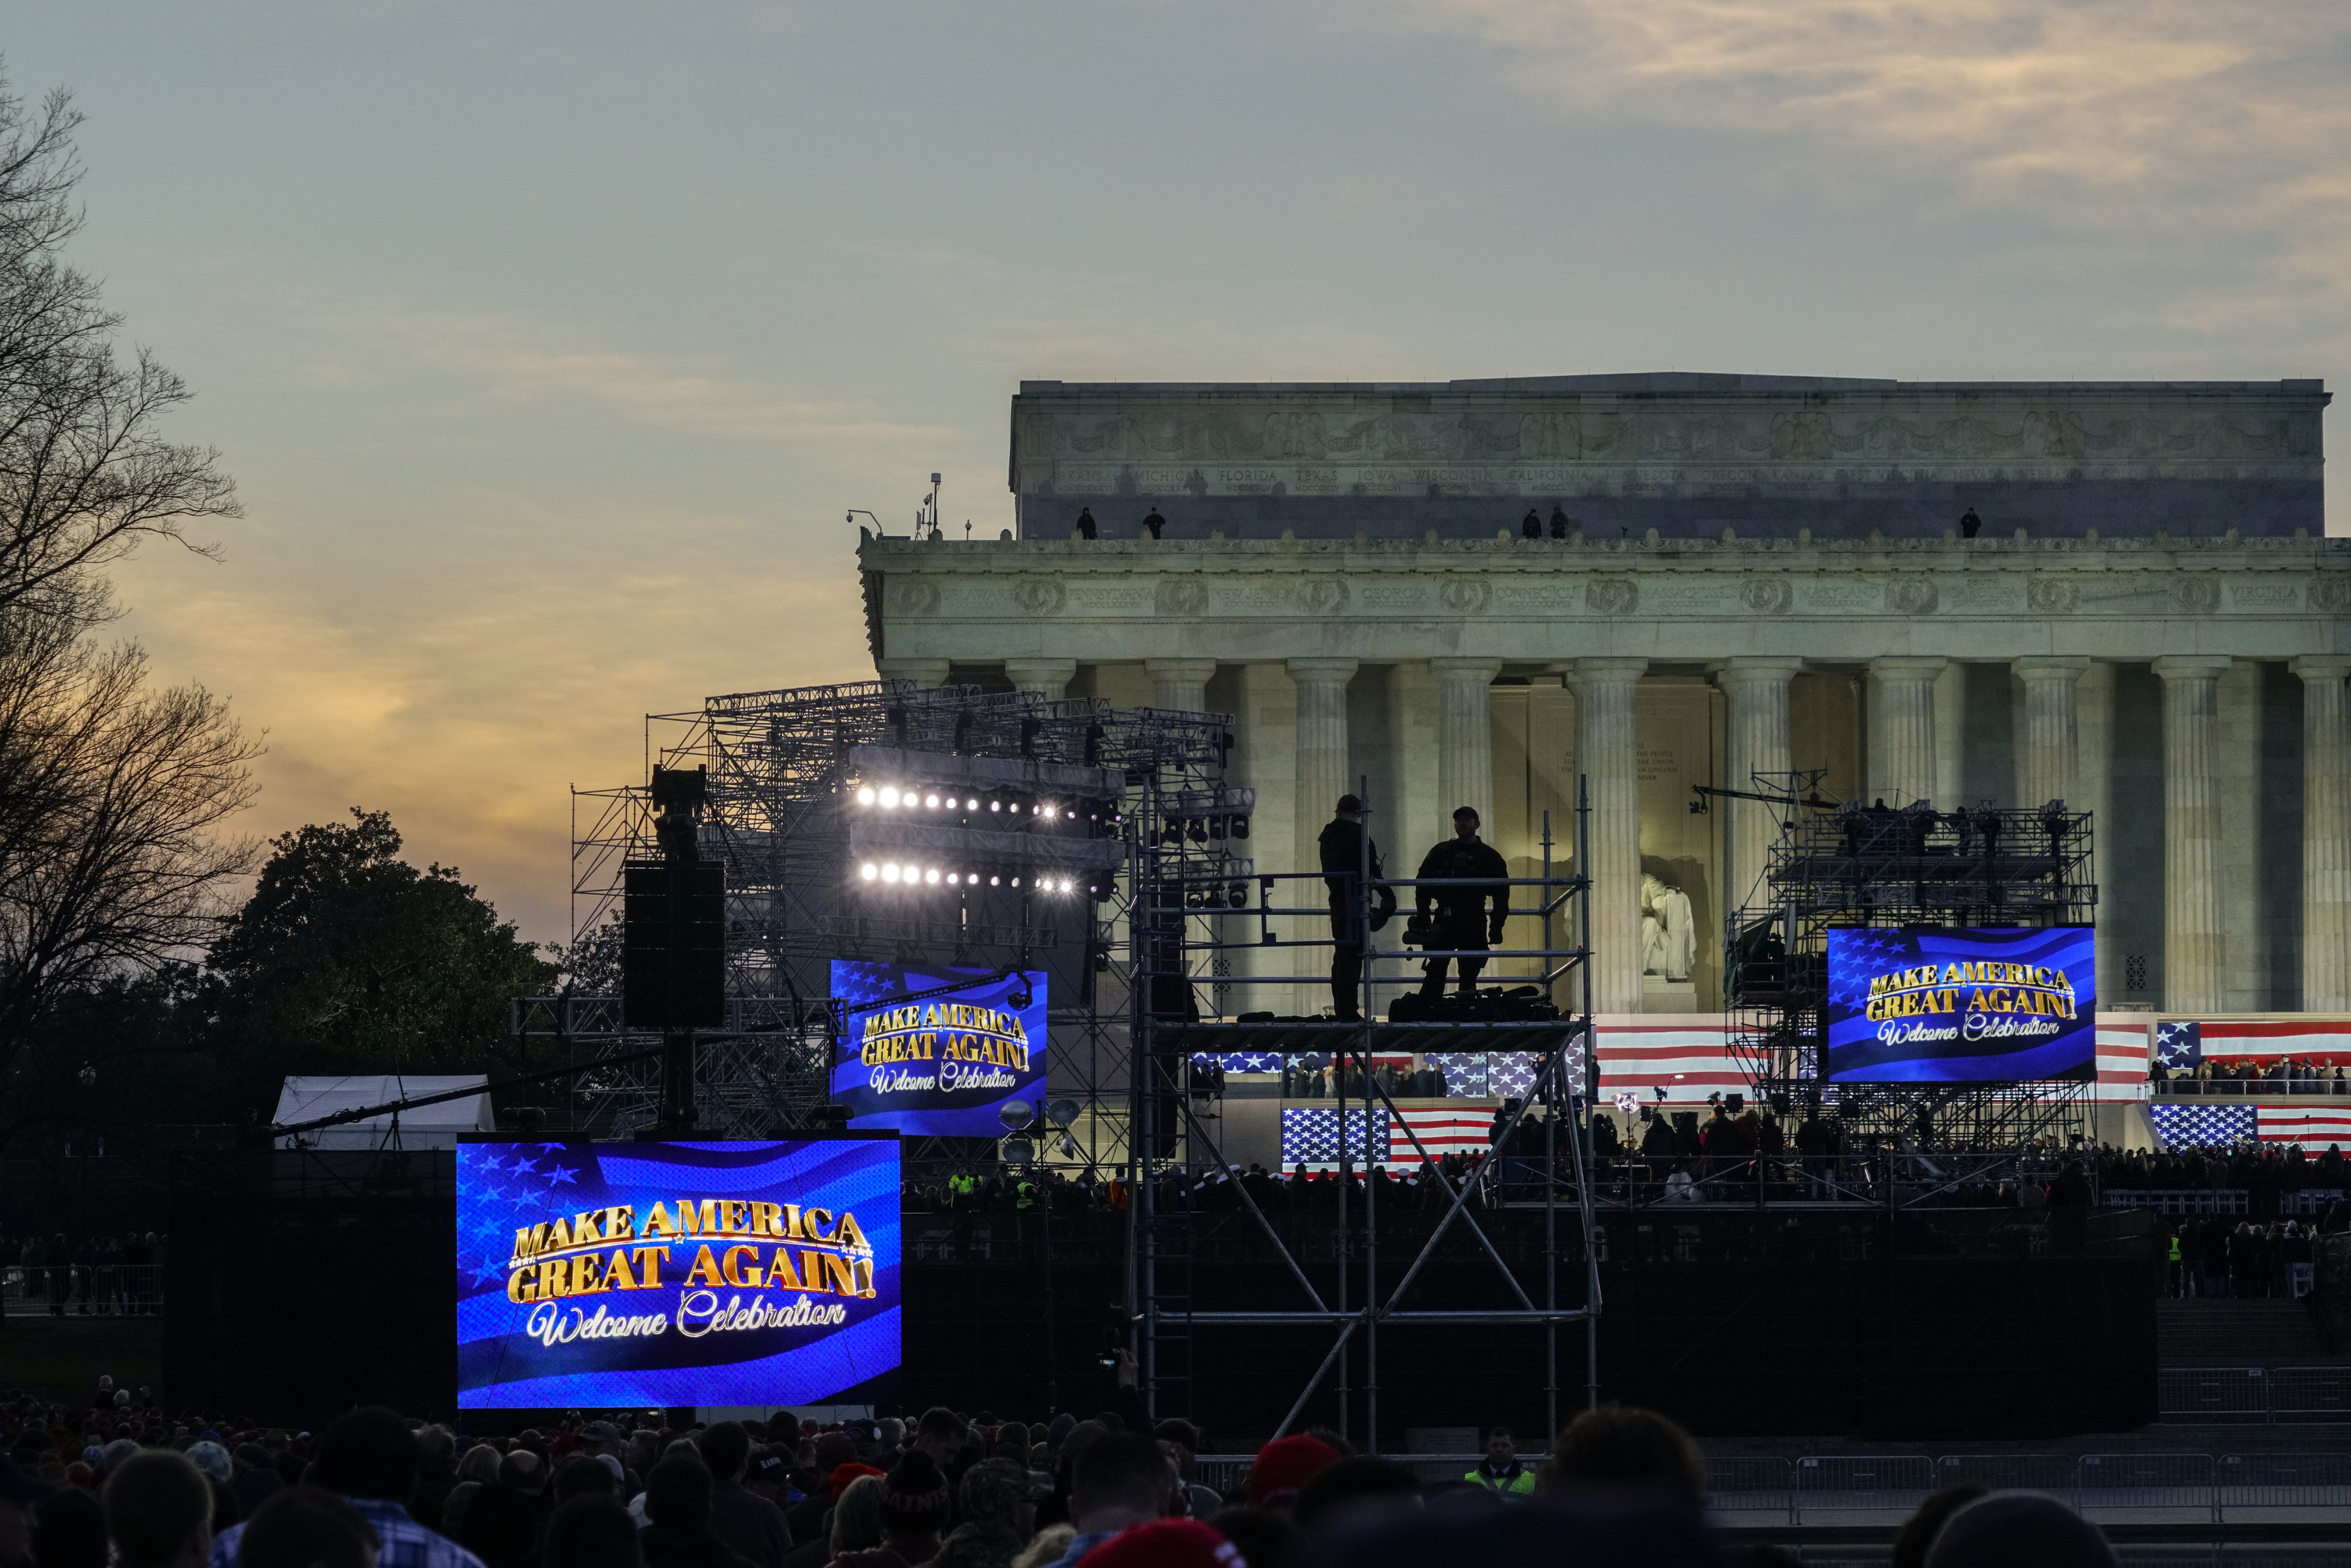 A view of the setup at the "Voices of the People: Make America Great Again Welcome Concert" in front of the Lincoln Memorial on Jan. 19, 2017. (Peter van Agtmael—Magnum Photos for TIME)